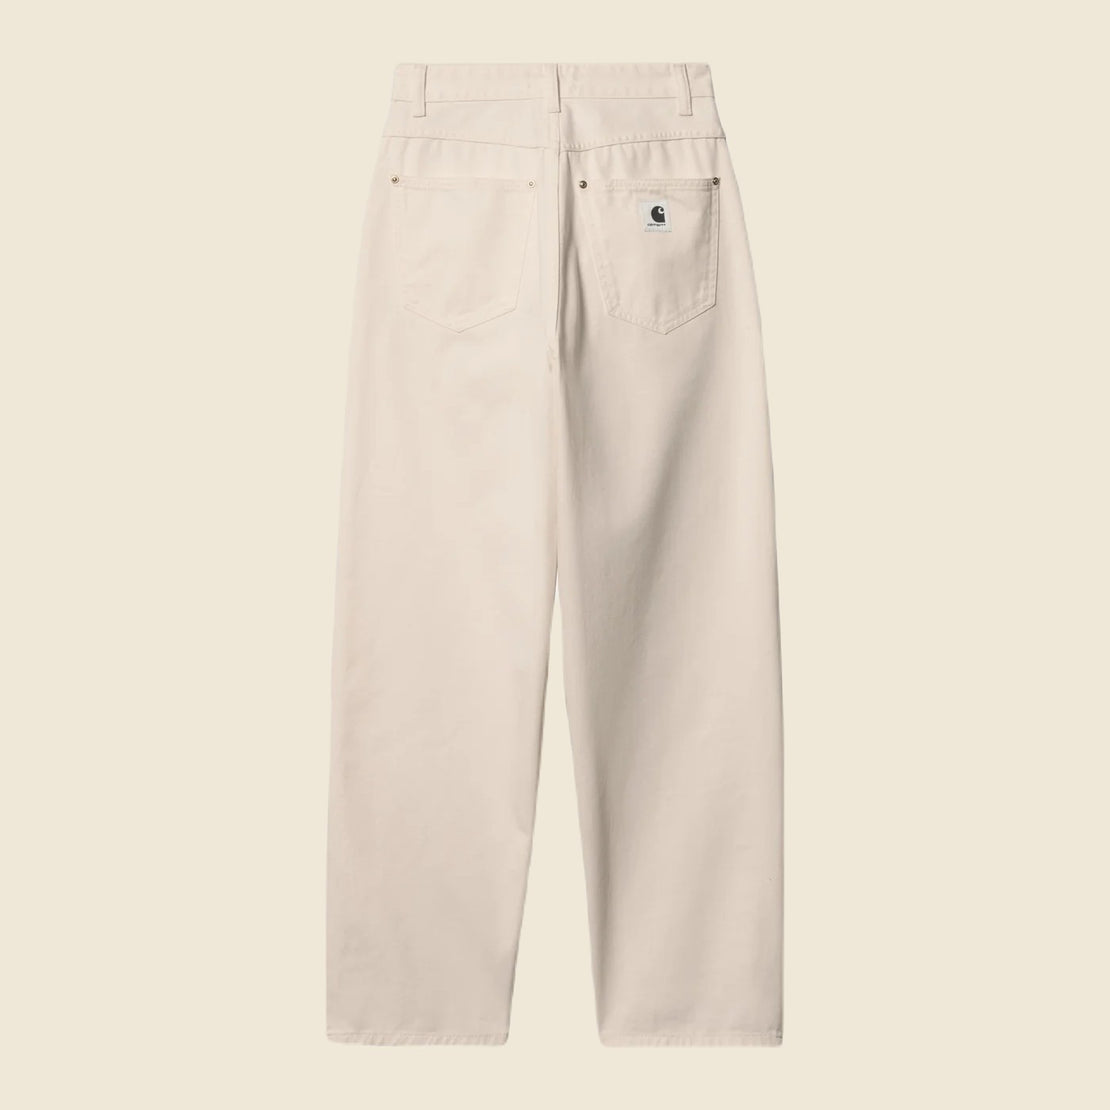 Derby Pant - Natural - Carhartt WIP - STAG Provisions - W - Pants - Twill